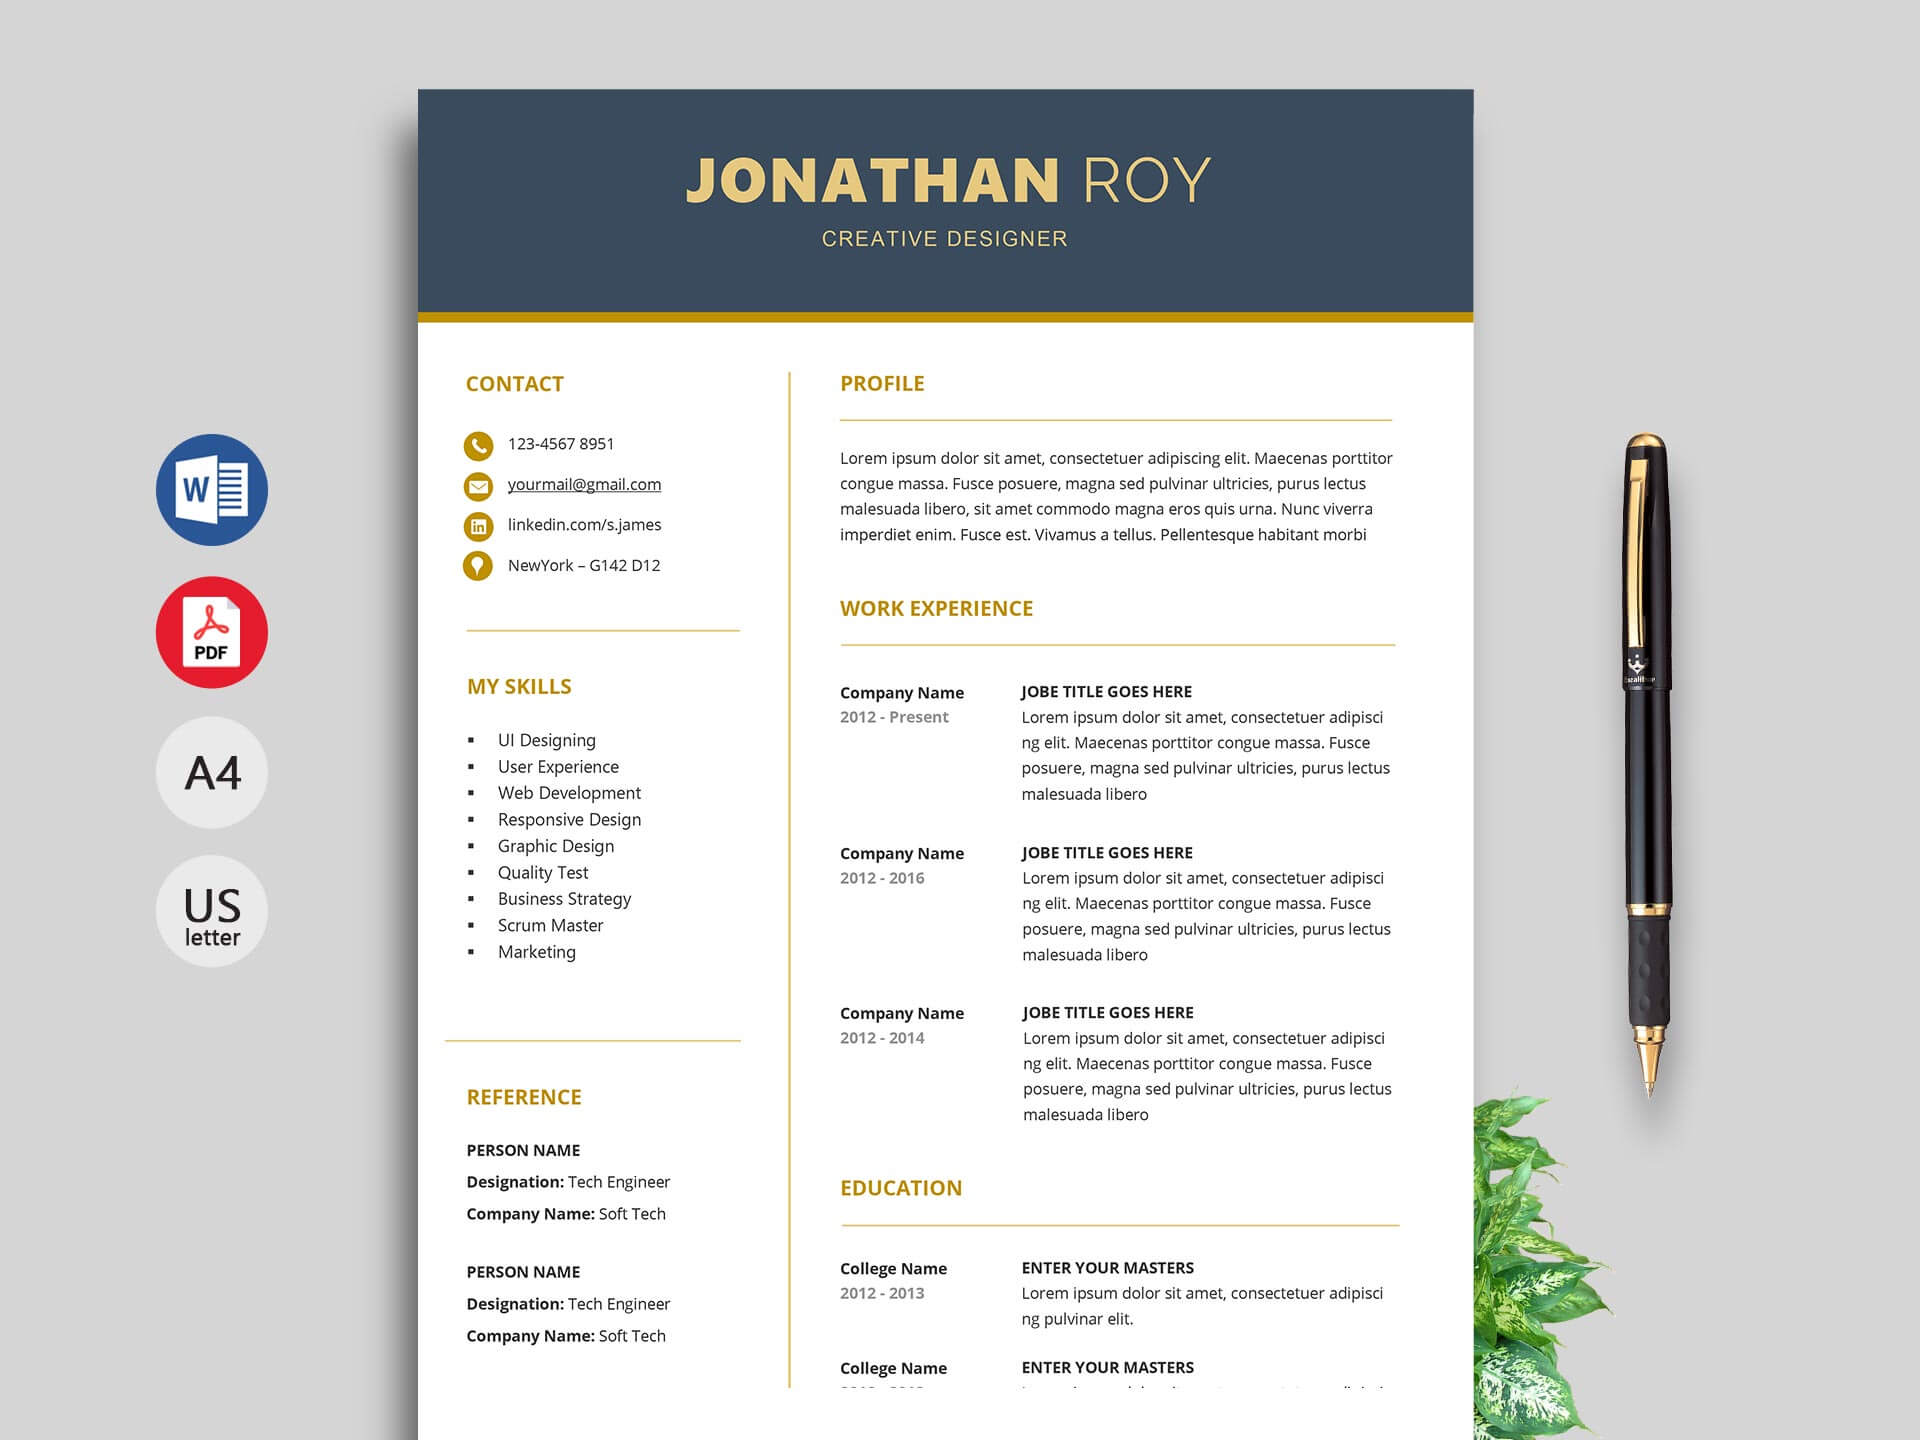 Free Simple Resume & Cv Templates Word Format 2020 | Resumekraft Within How To Find A Resume Template On Word